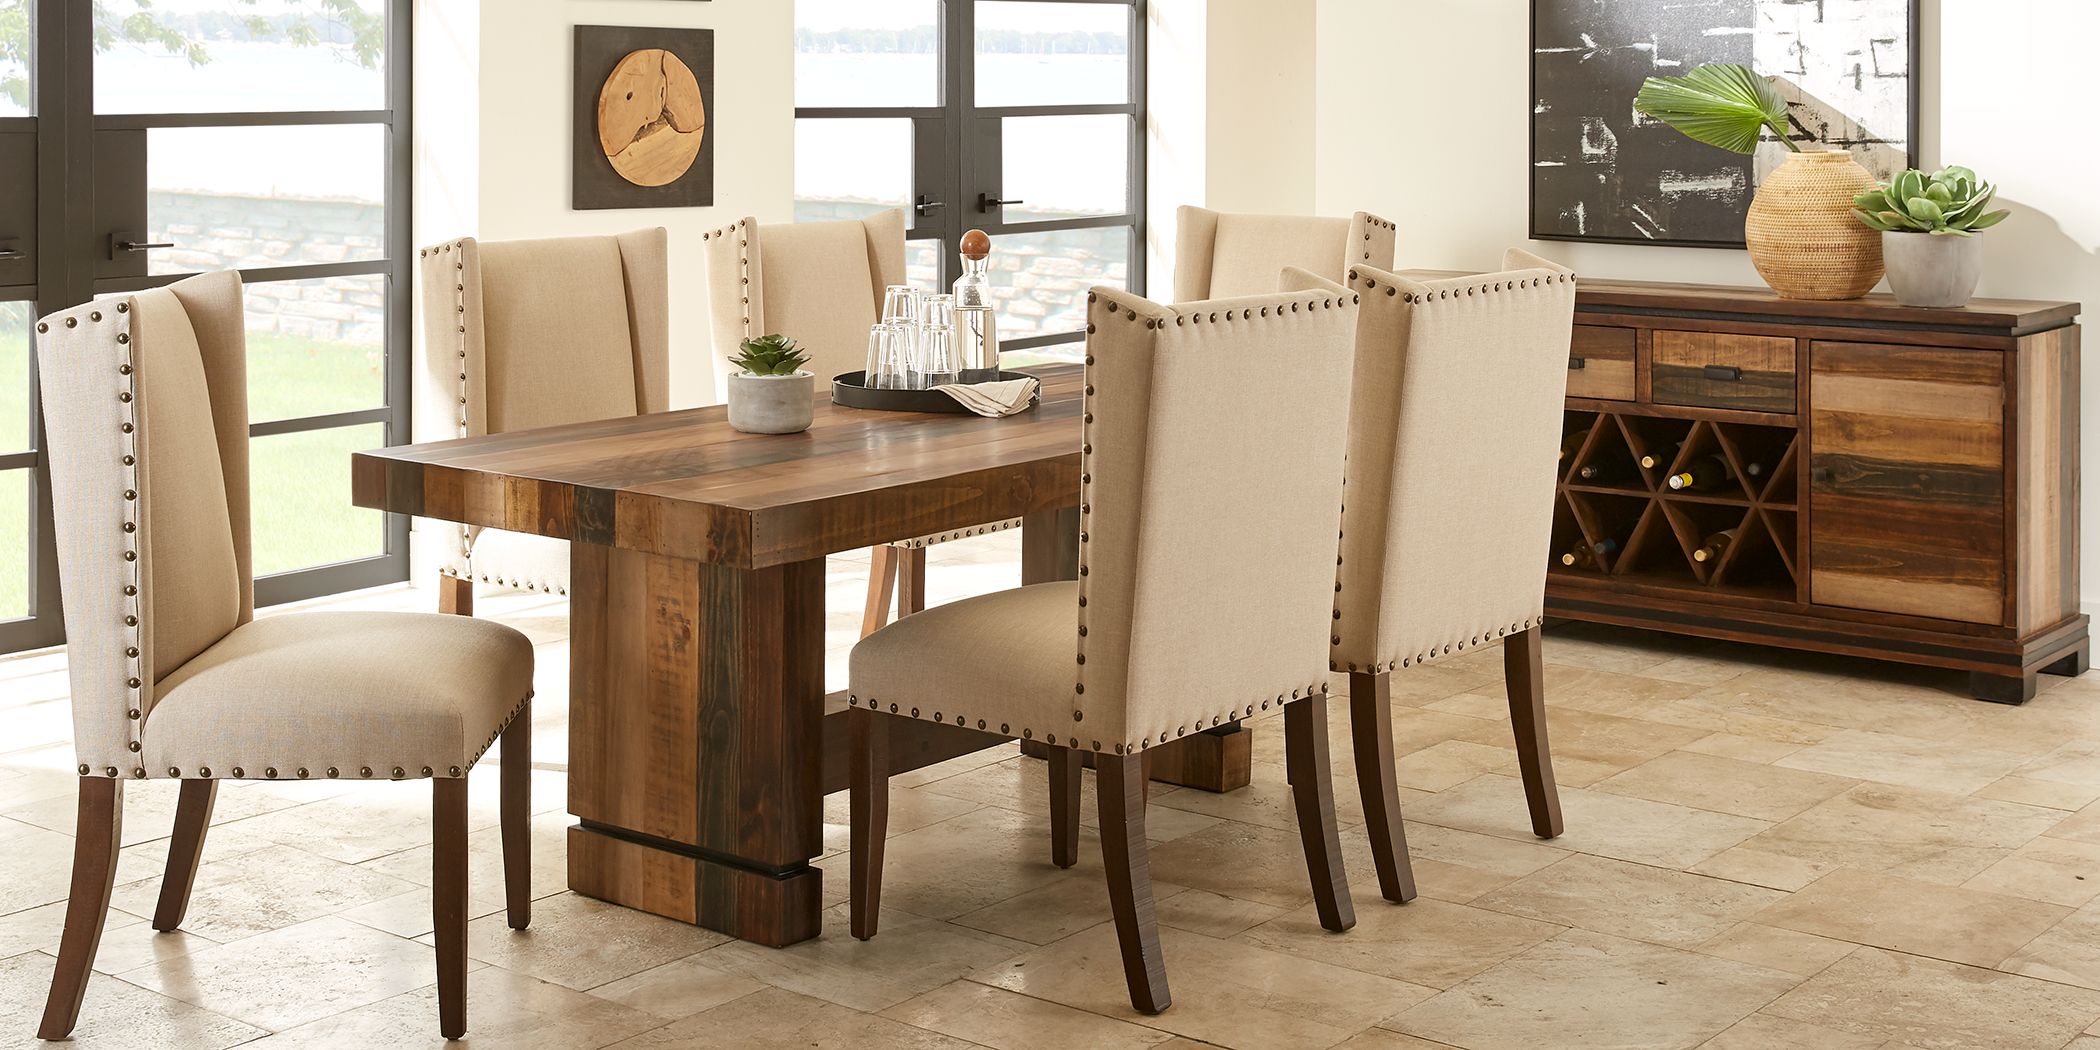 Rooms To Go Cindy Crawford Dining Room Set